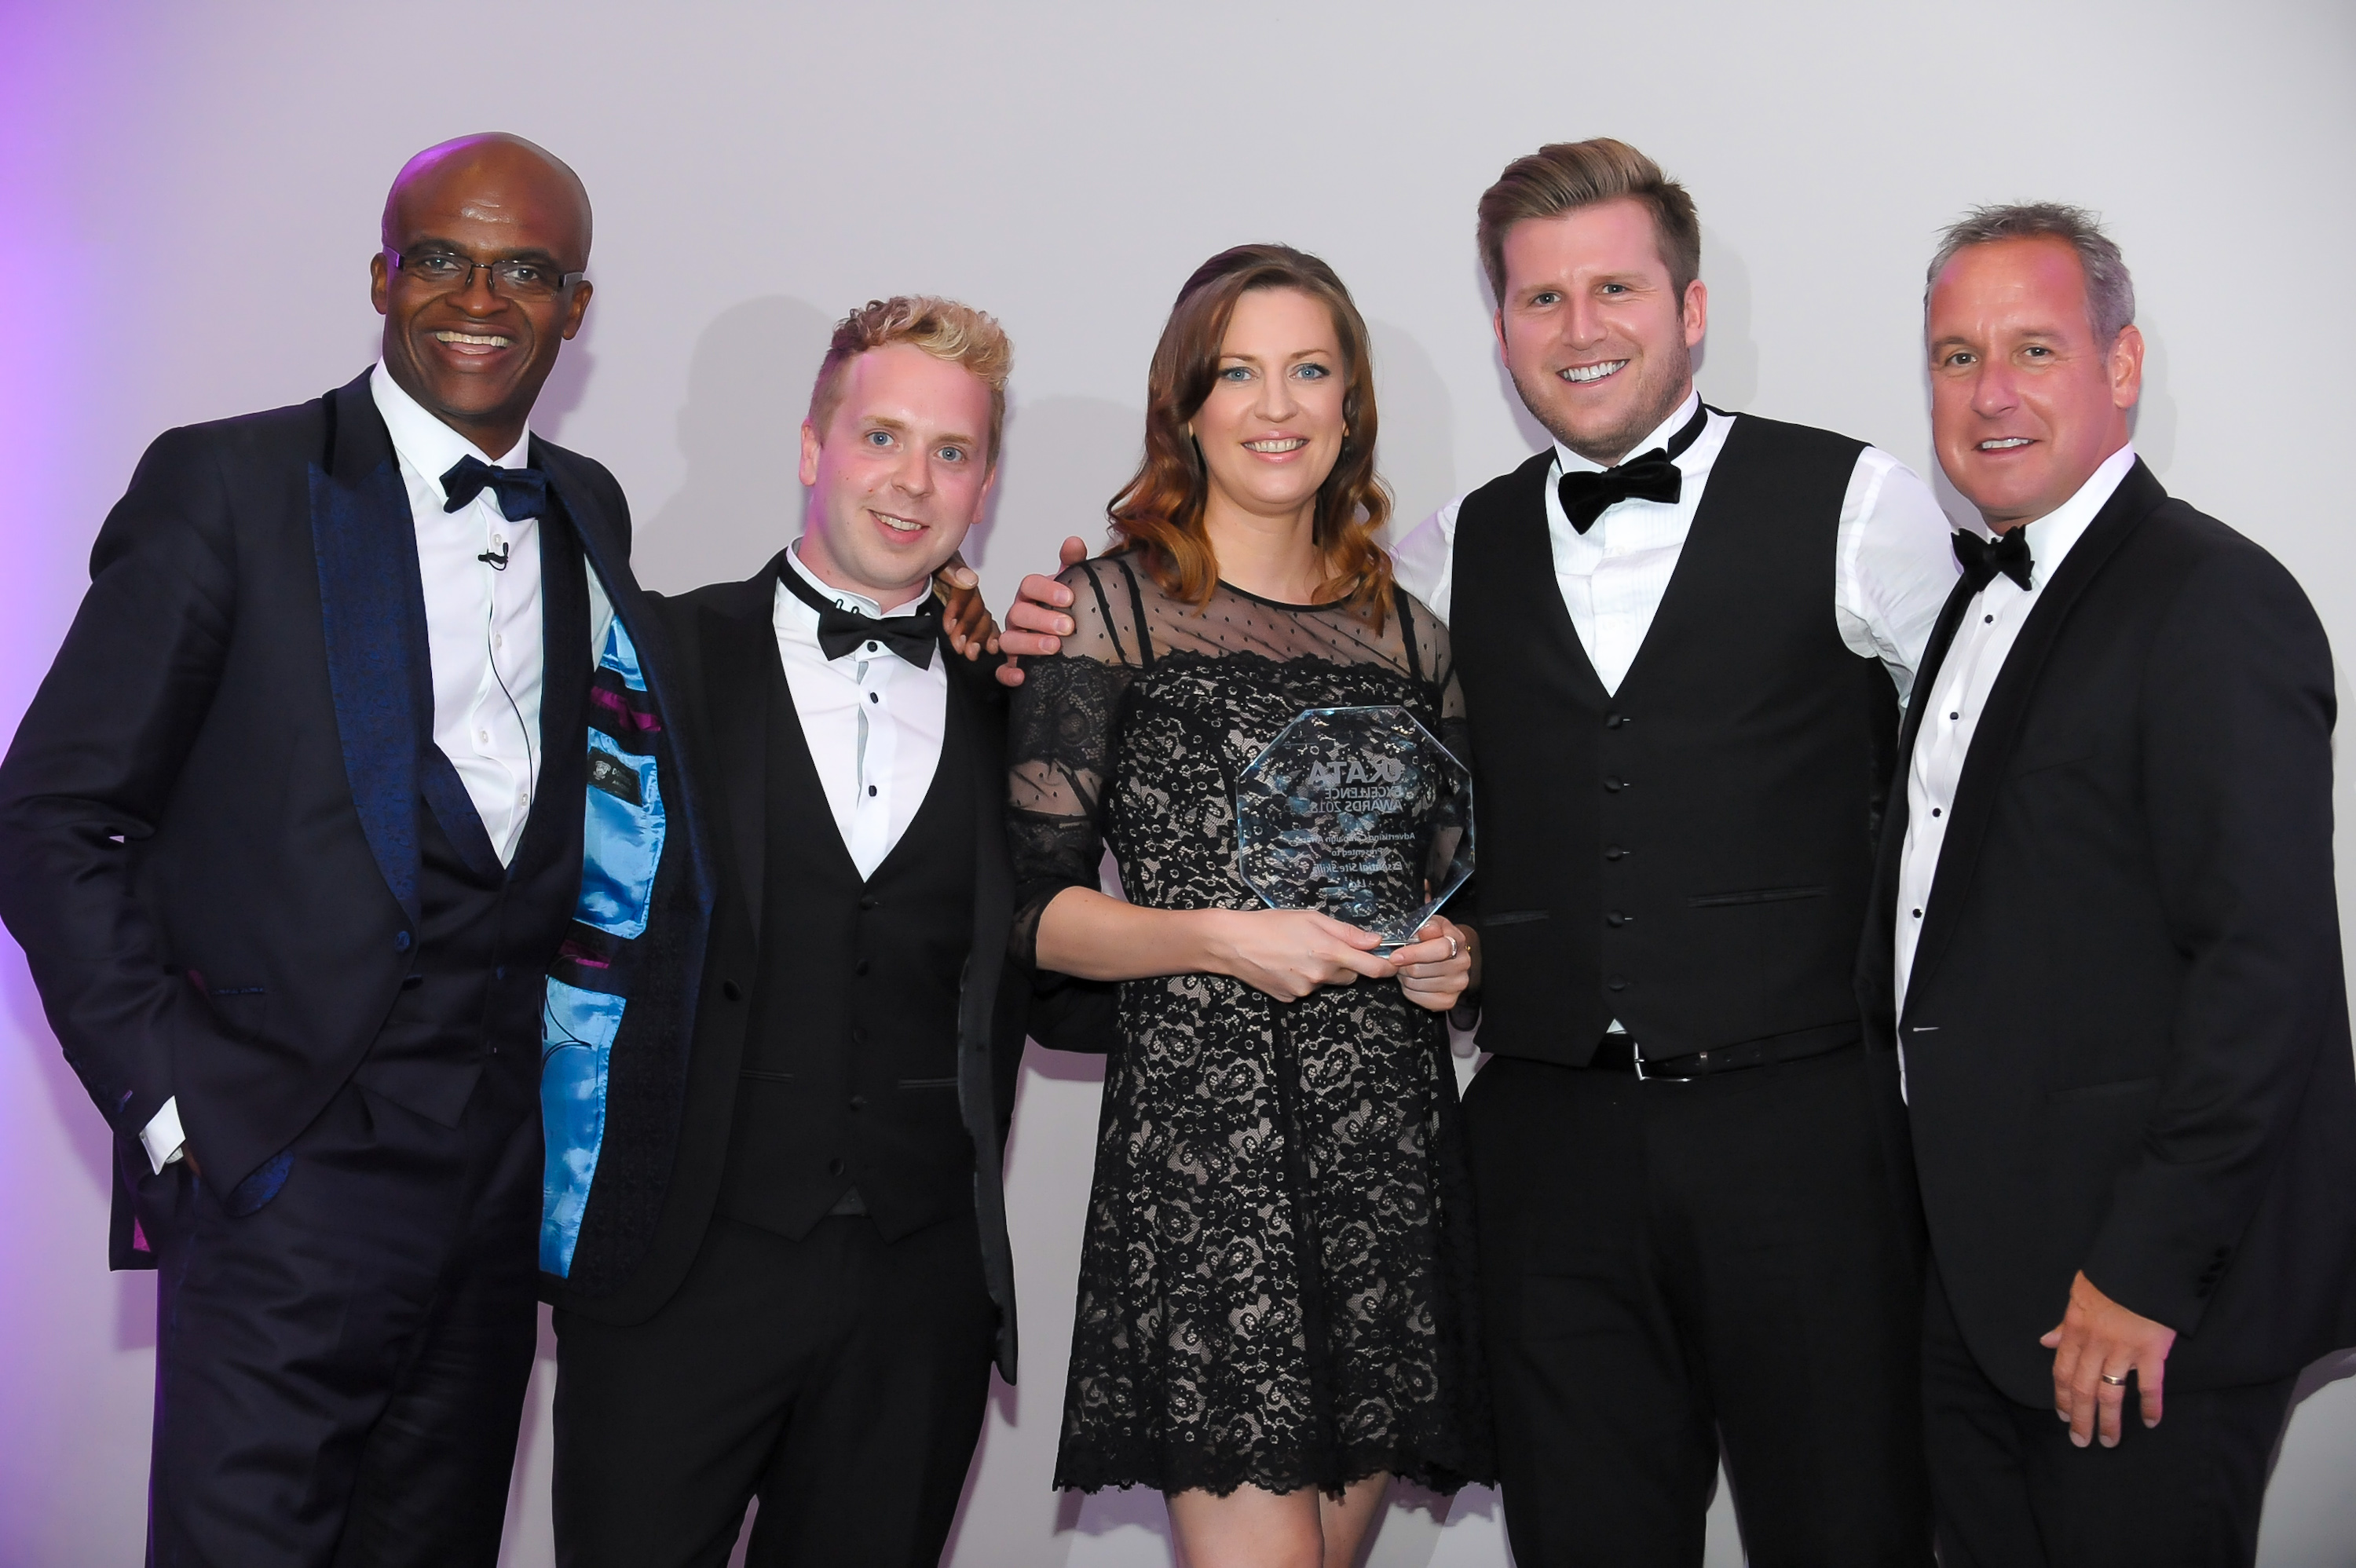 award skills site asbestos nottingham scoops industry national company essential